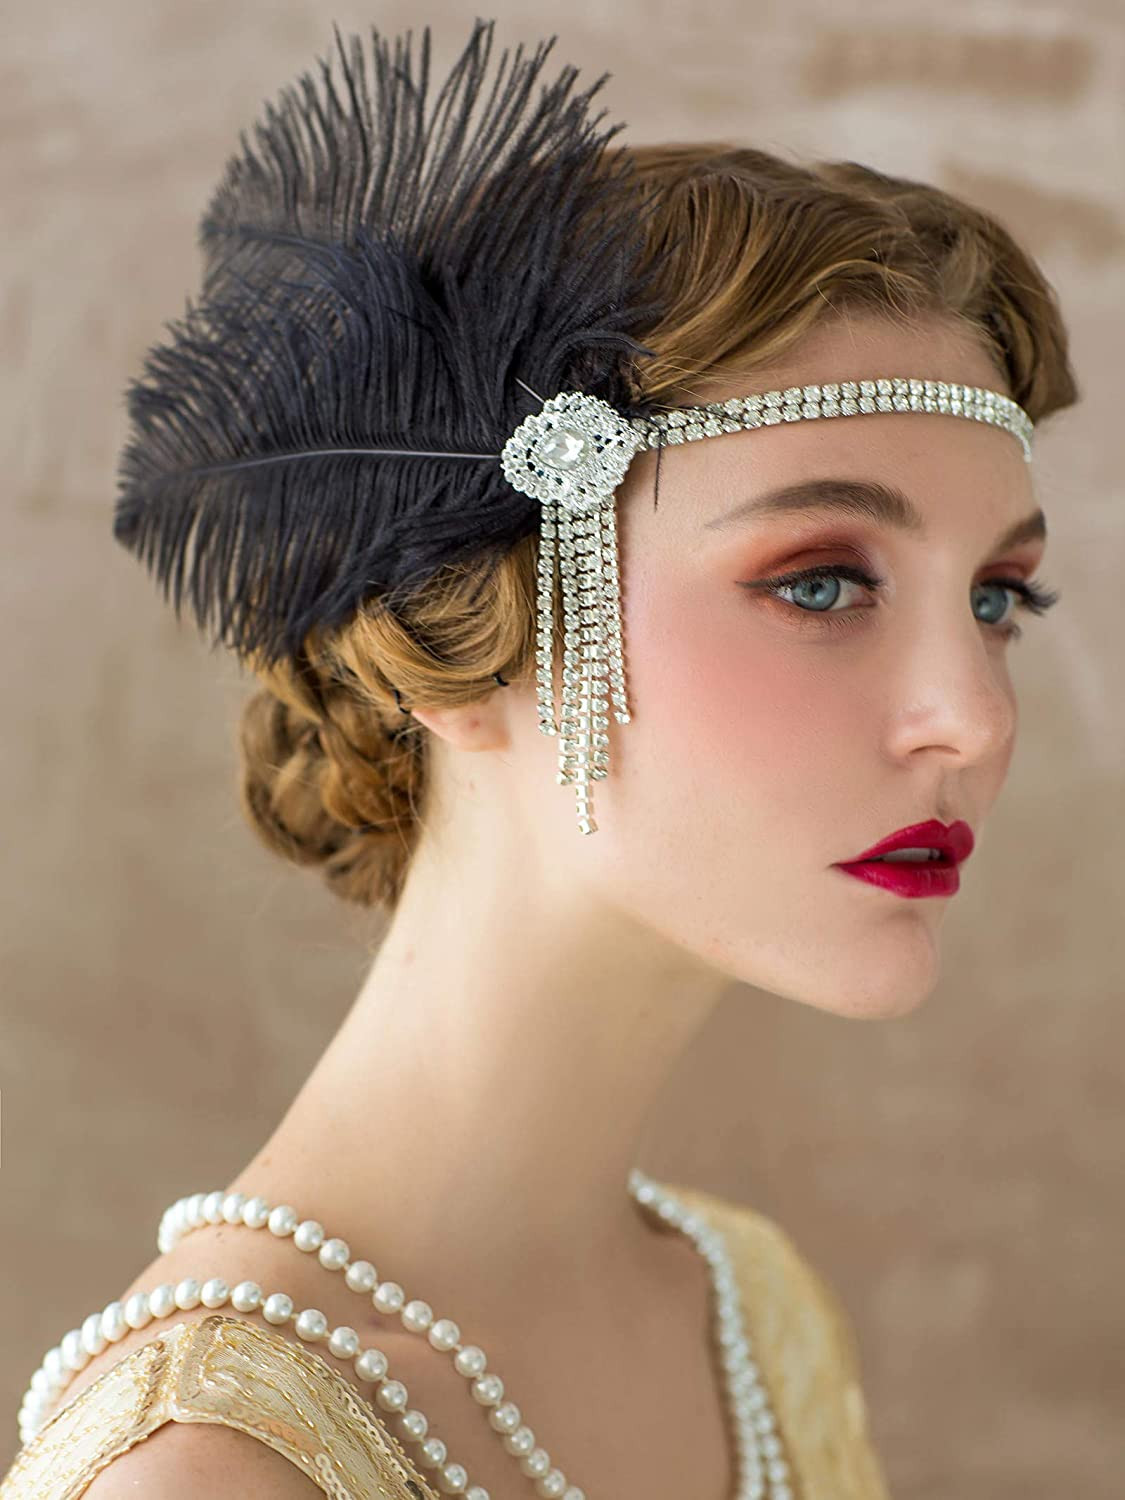 Great Gatsby Hairstyles For Long Hair
 1920s Hairstyles History Long Hair to Bobbed Hair